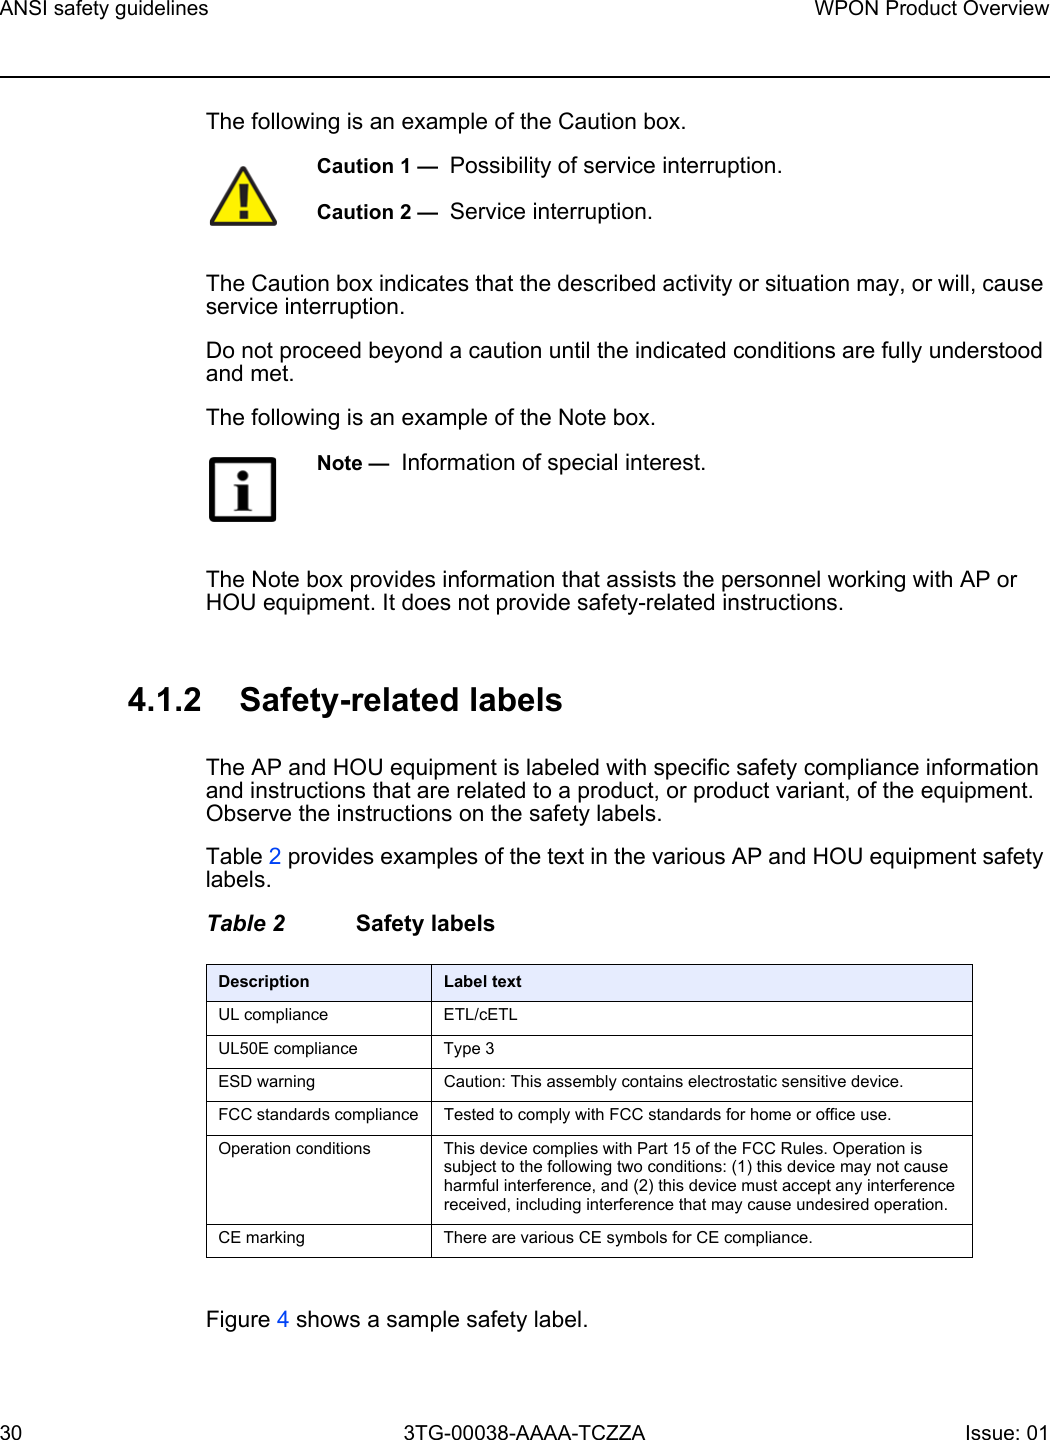 ANSI safety guidelines30WPON Product Overview3TG-00038-AAAA-TCZZA Issue: 01 The following is an example of the Caution box.The Caution box indicates that the described activity or situation may, or will, cause service interruption.Do not proceed beyond a caution until the indicated conditions are fully understood and met.The following is an example of the Note box.The Note box provides information that assists the personnel working with AP or HOU equipment. It does not provide safety-related instructions.4.1.2 Safety-related labelsThe AP and HOU equipment is labeled with specific safety compliance information and instructions that are related to a product, or product variant, of the equipment. Observe the instructions on the safety labels.Table 2 provides examples of the text in the various AP and HOU equipment safety labels. Table 2 Safety labelsFigure 4 shows a sample safety label. Caution 1 —  Possibility of service interruption.Caution 2 —  Service interruption.Note —  Information of special interest.Description Label textUL compliance ETL/cETL UL50E compliance Type 3ESD warning Caution: This assembly contains electrostatic sensitive device.FCC standards compliance Tested to comply with FCC standards for home or office use.Operation conditions This device complies with Part 15 of the FCC Rules. Operation is subject to the following two conditions: (1) this device may not cause harmful interference, and (2) this device must accept any interference received, including interference that may cause undesired operation.CE marking There are various CE symbols for CE compliance.